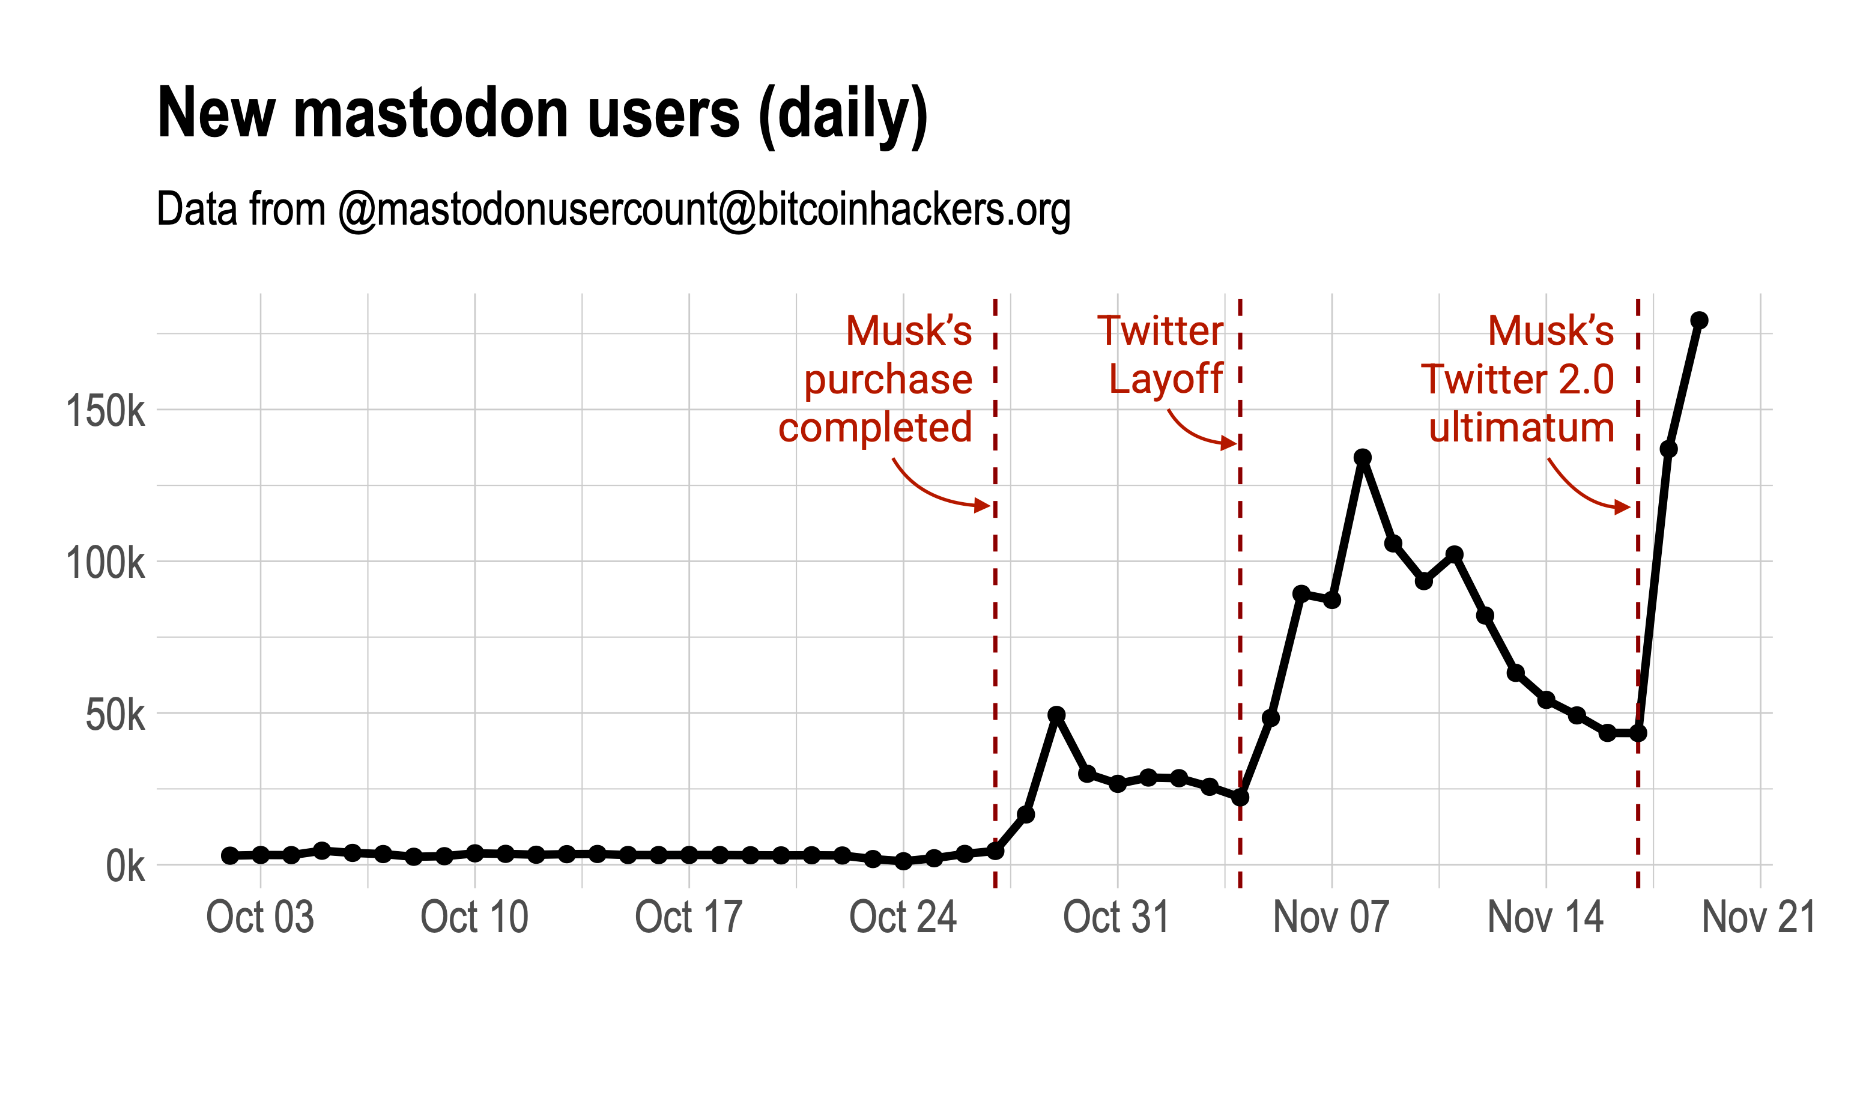 The plot shows the graph of the number of new users in the Mastodon platform as a function of the date for the last months. 
It can be seen that until Musk's purchase was completed, the daily new users were about one thousand. 
It jumped to twenty-five thousand during the first migration to Mastodon, just after the Musk's purchase of Twitter was completed on October 27.
A second jump to 100k new users per day happened in the second wave, just after the massive layoffs in Twitter on Nov 4th. 
Finally the third jump to almost 150k per day happened after Musk's Twitter 2.0 ultimatum on Nov 17th.